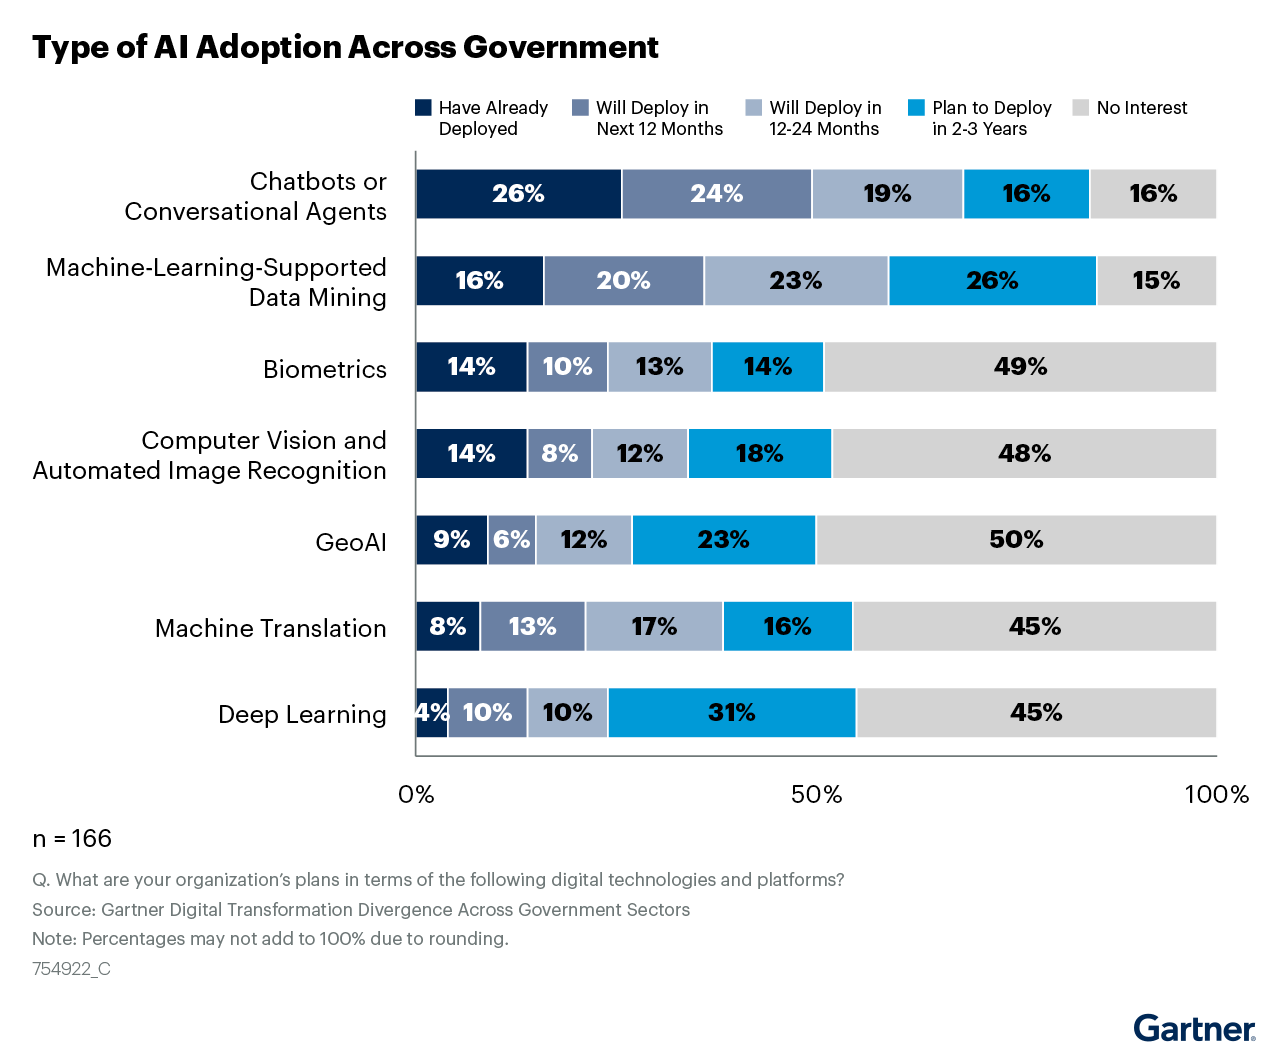 A diagram indicating the various types of AI adoption across government. They are: chatbots or conversational agents; machine learning supported data mining; biometrics; computer vision and automated image recognition; GeoAI; machine translation; and deep learning.